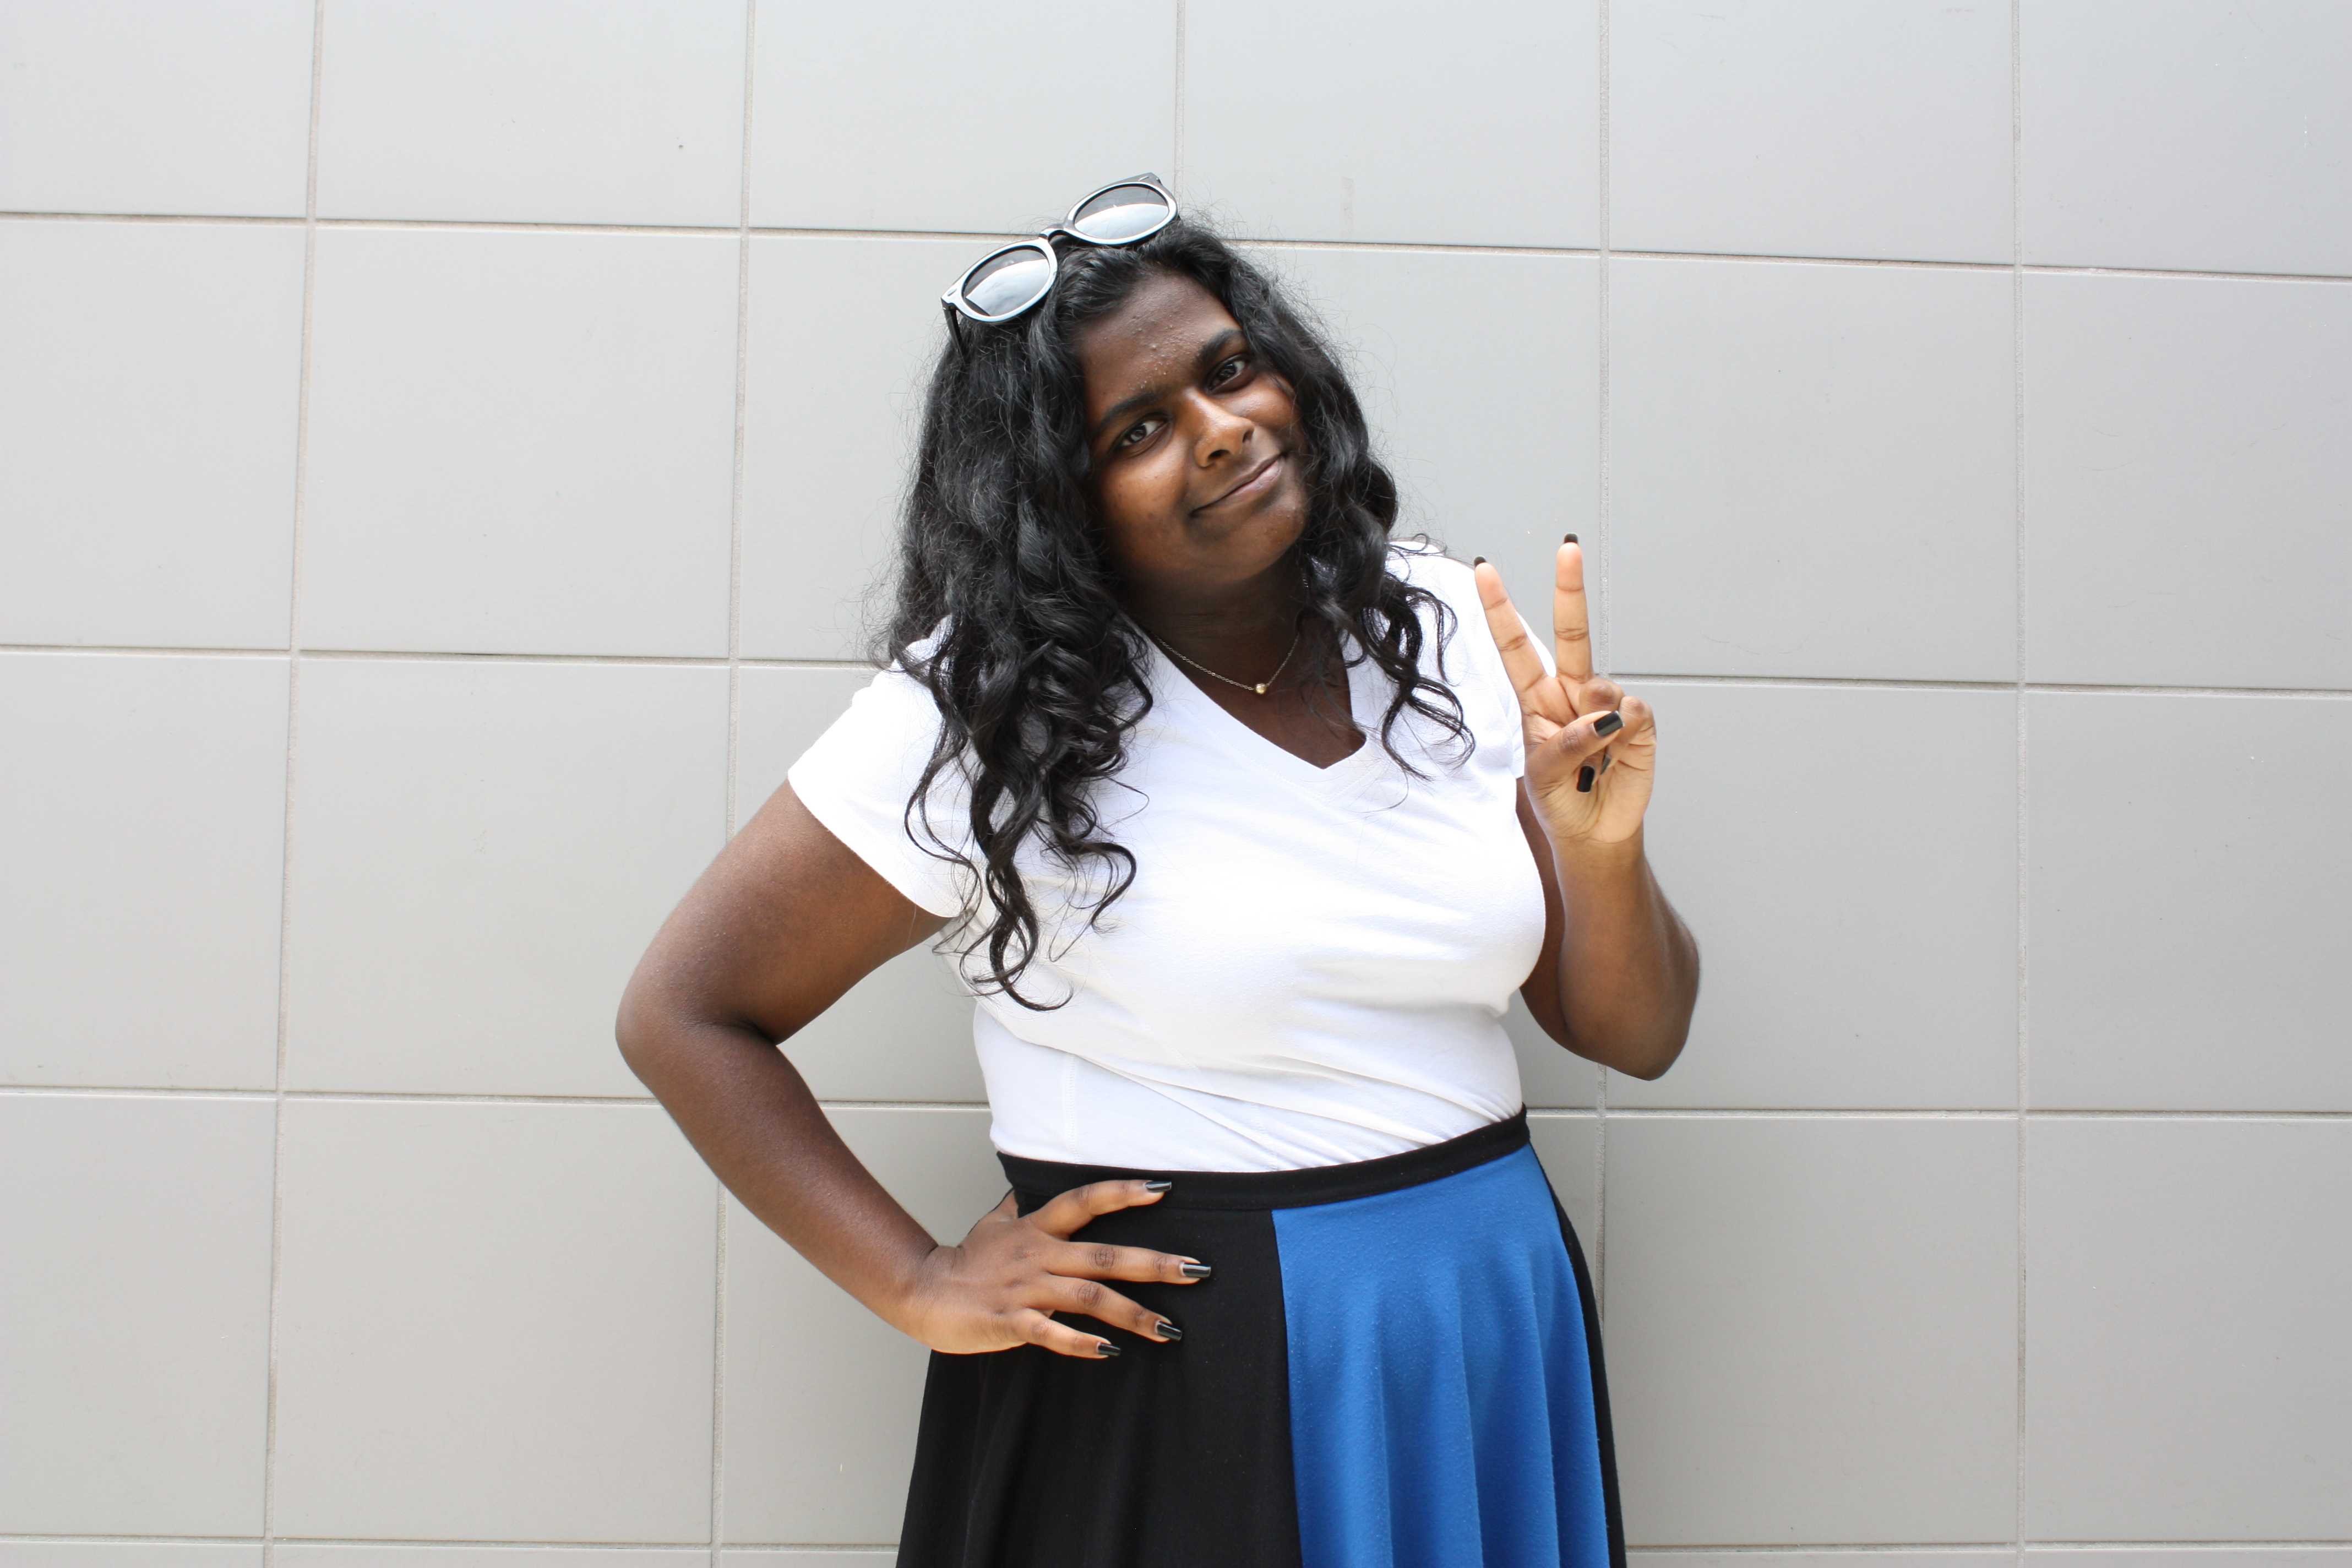 Sophomore Suvee Ranasinghe creates her own Youtube videos, has an extensive sunglasses collection and keeps up with the latest fashion trends. Credit: Chloey Settles/The Foothill Dragon Press